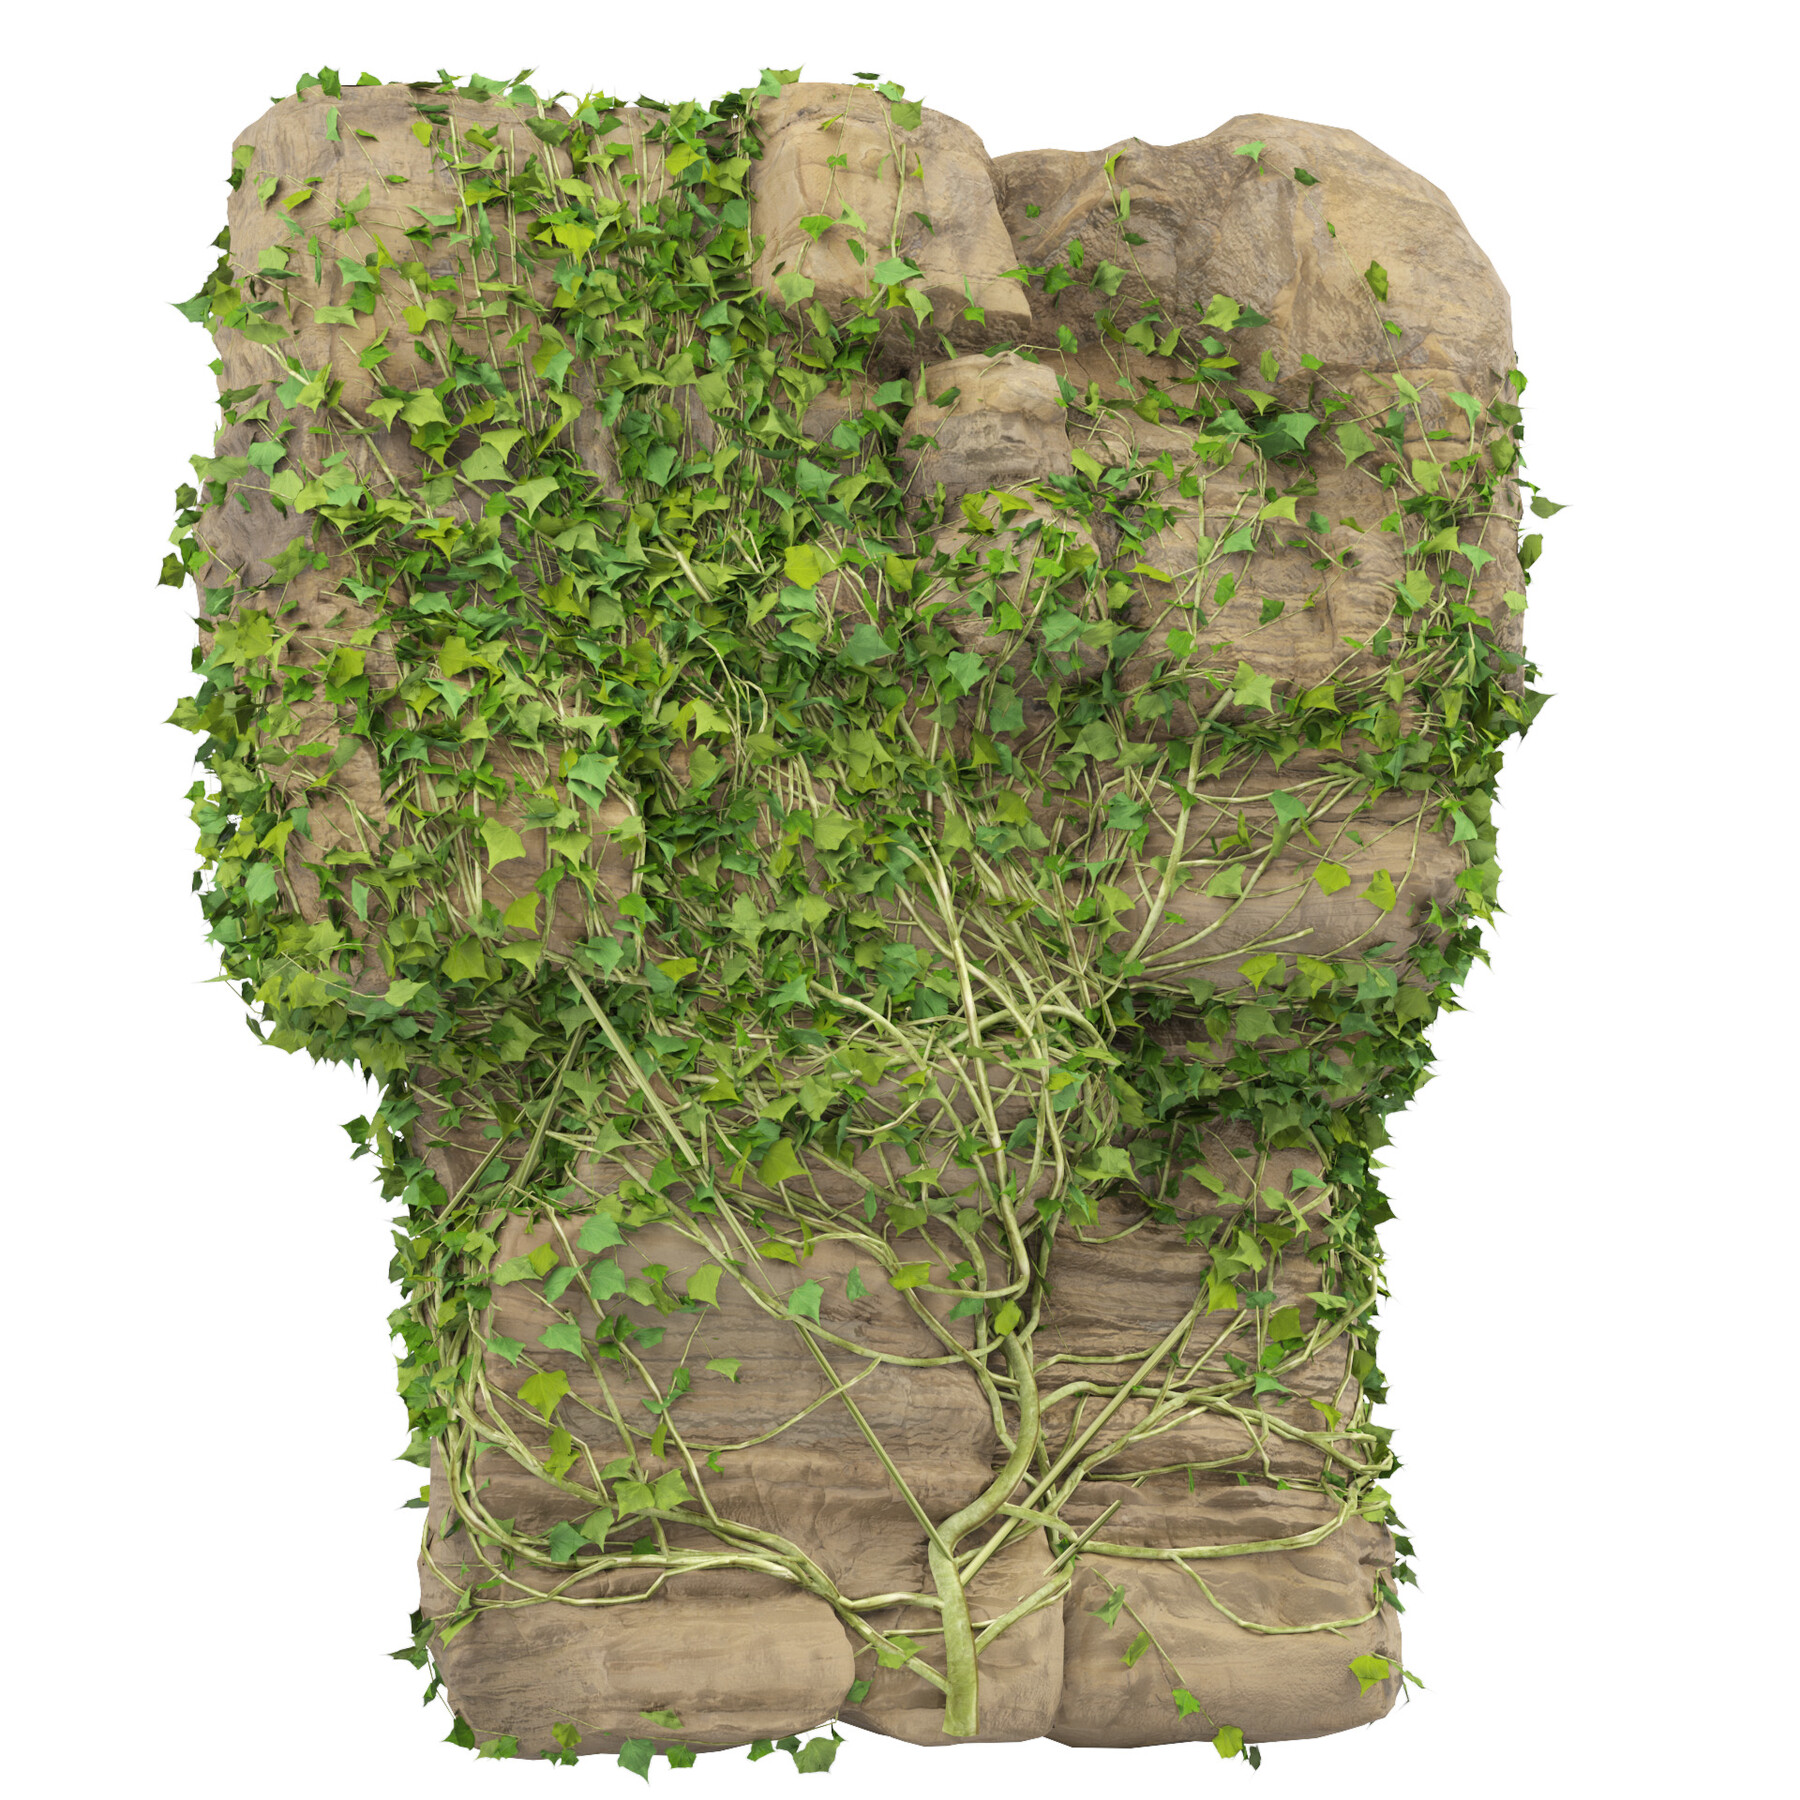 Mossy rocks and plants 3D model